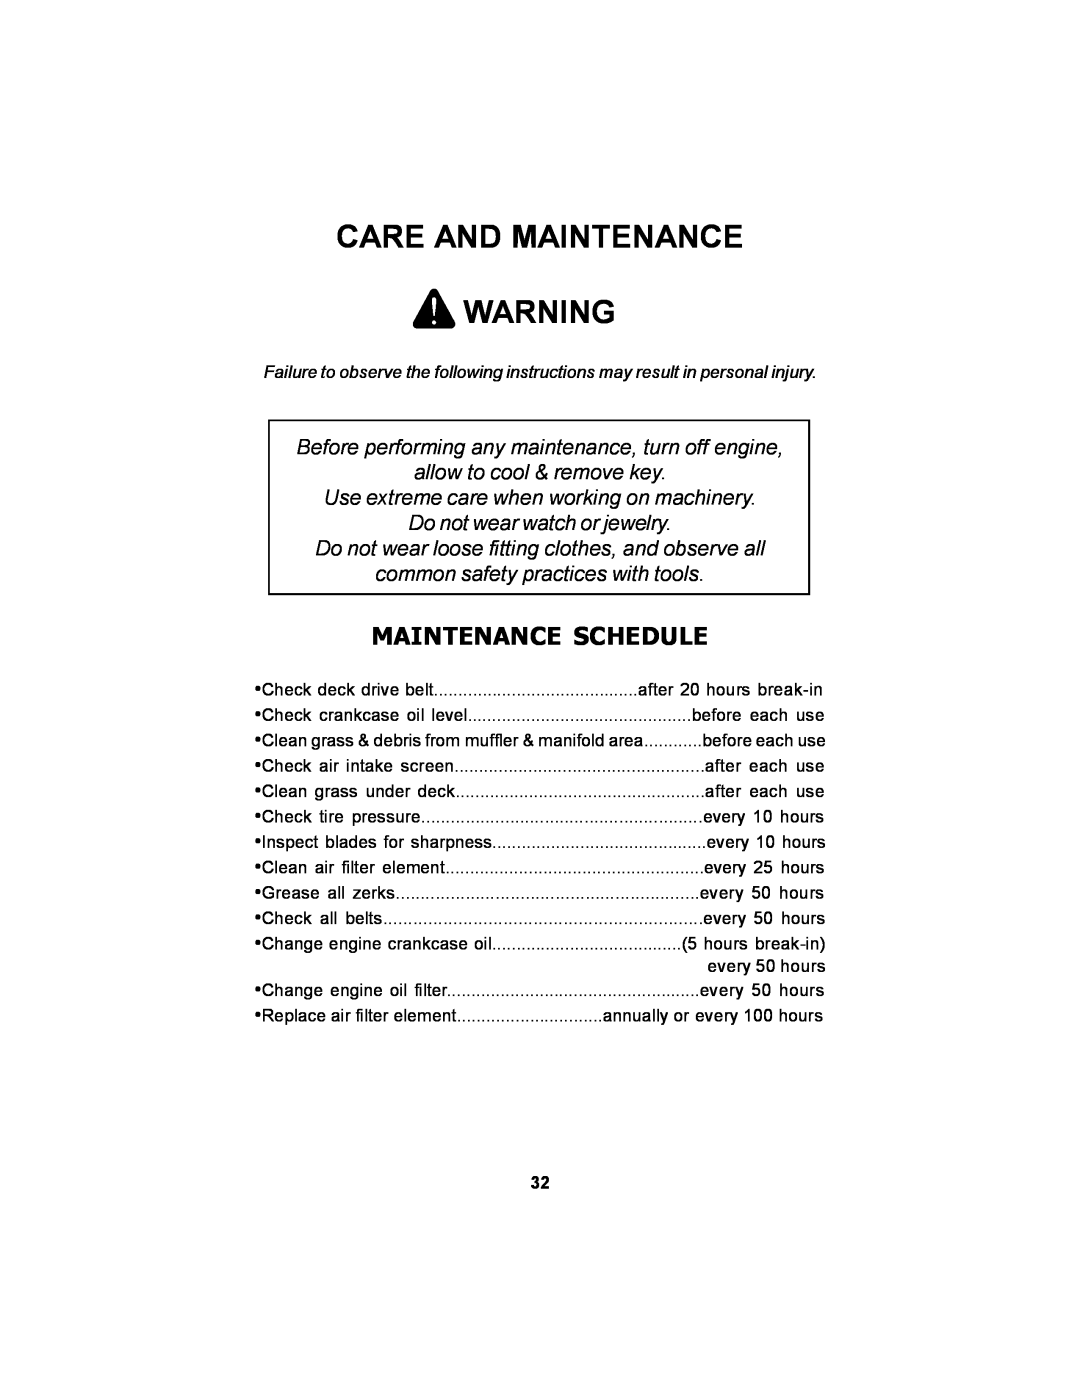 Dixon 14295-1005 manual Care And Maintenance, Maintenance Schedule, Before performing any maintenance, turn off engine 